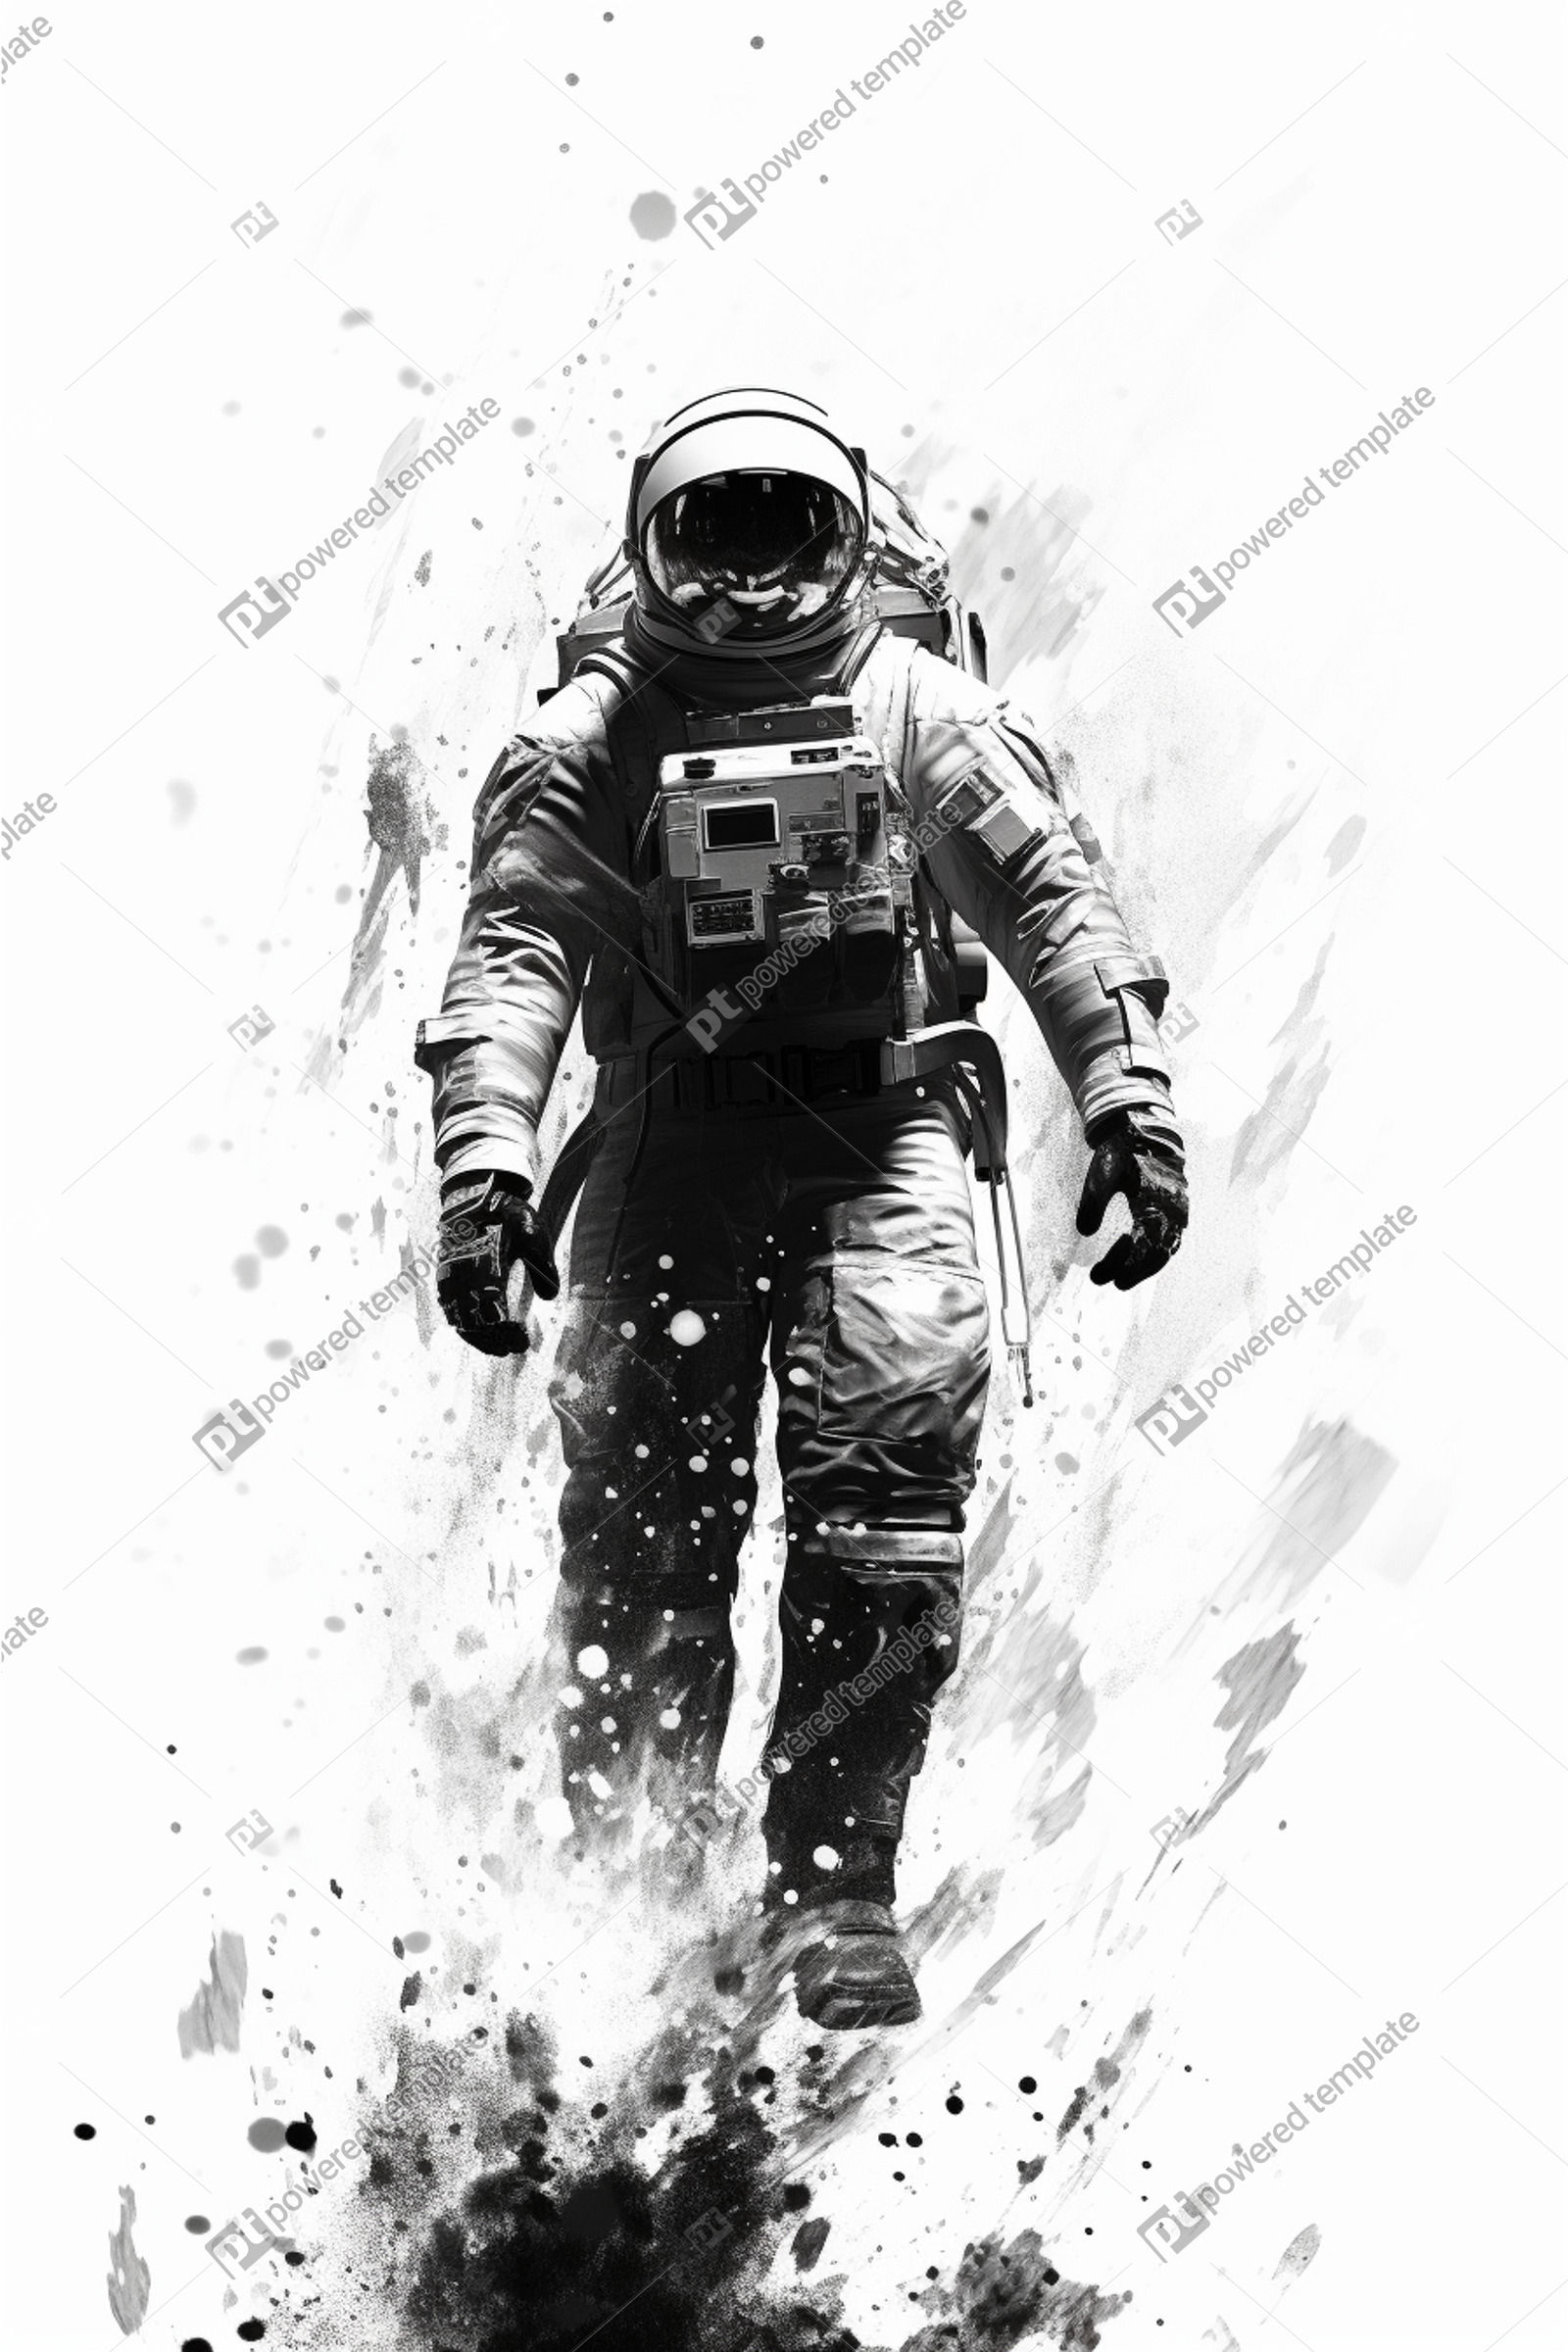 anime kawaii astronaut logo is out of this world adorable The astronaut's  chubby suit and helmet make for a charming design 20840924 Vector Art at  Vecteezy